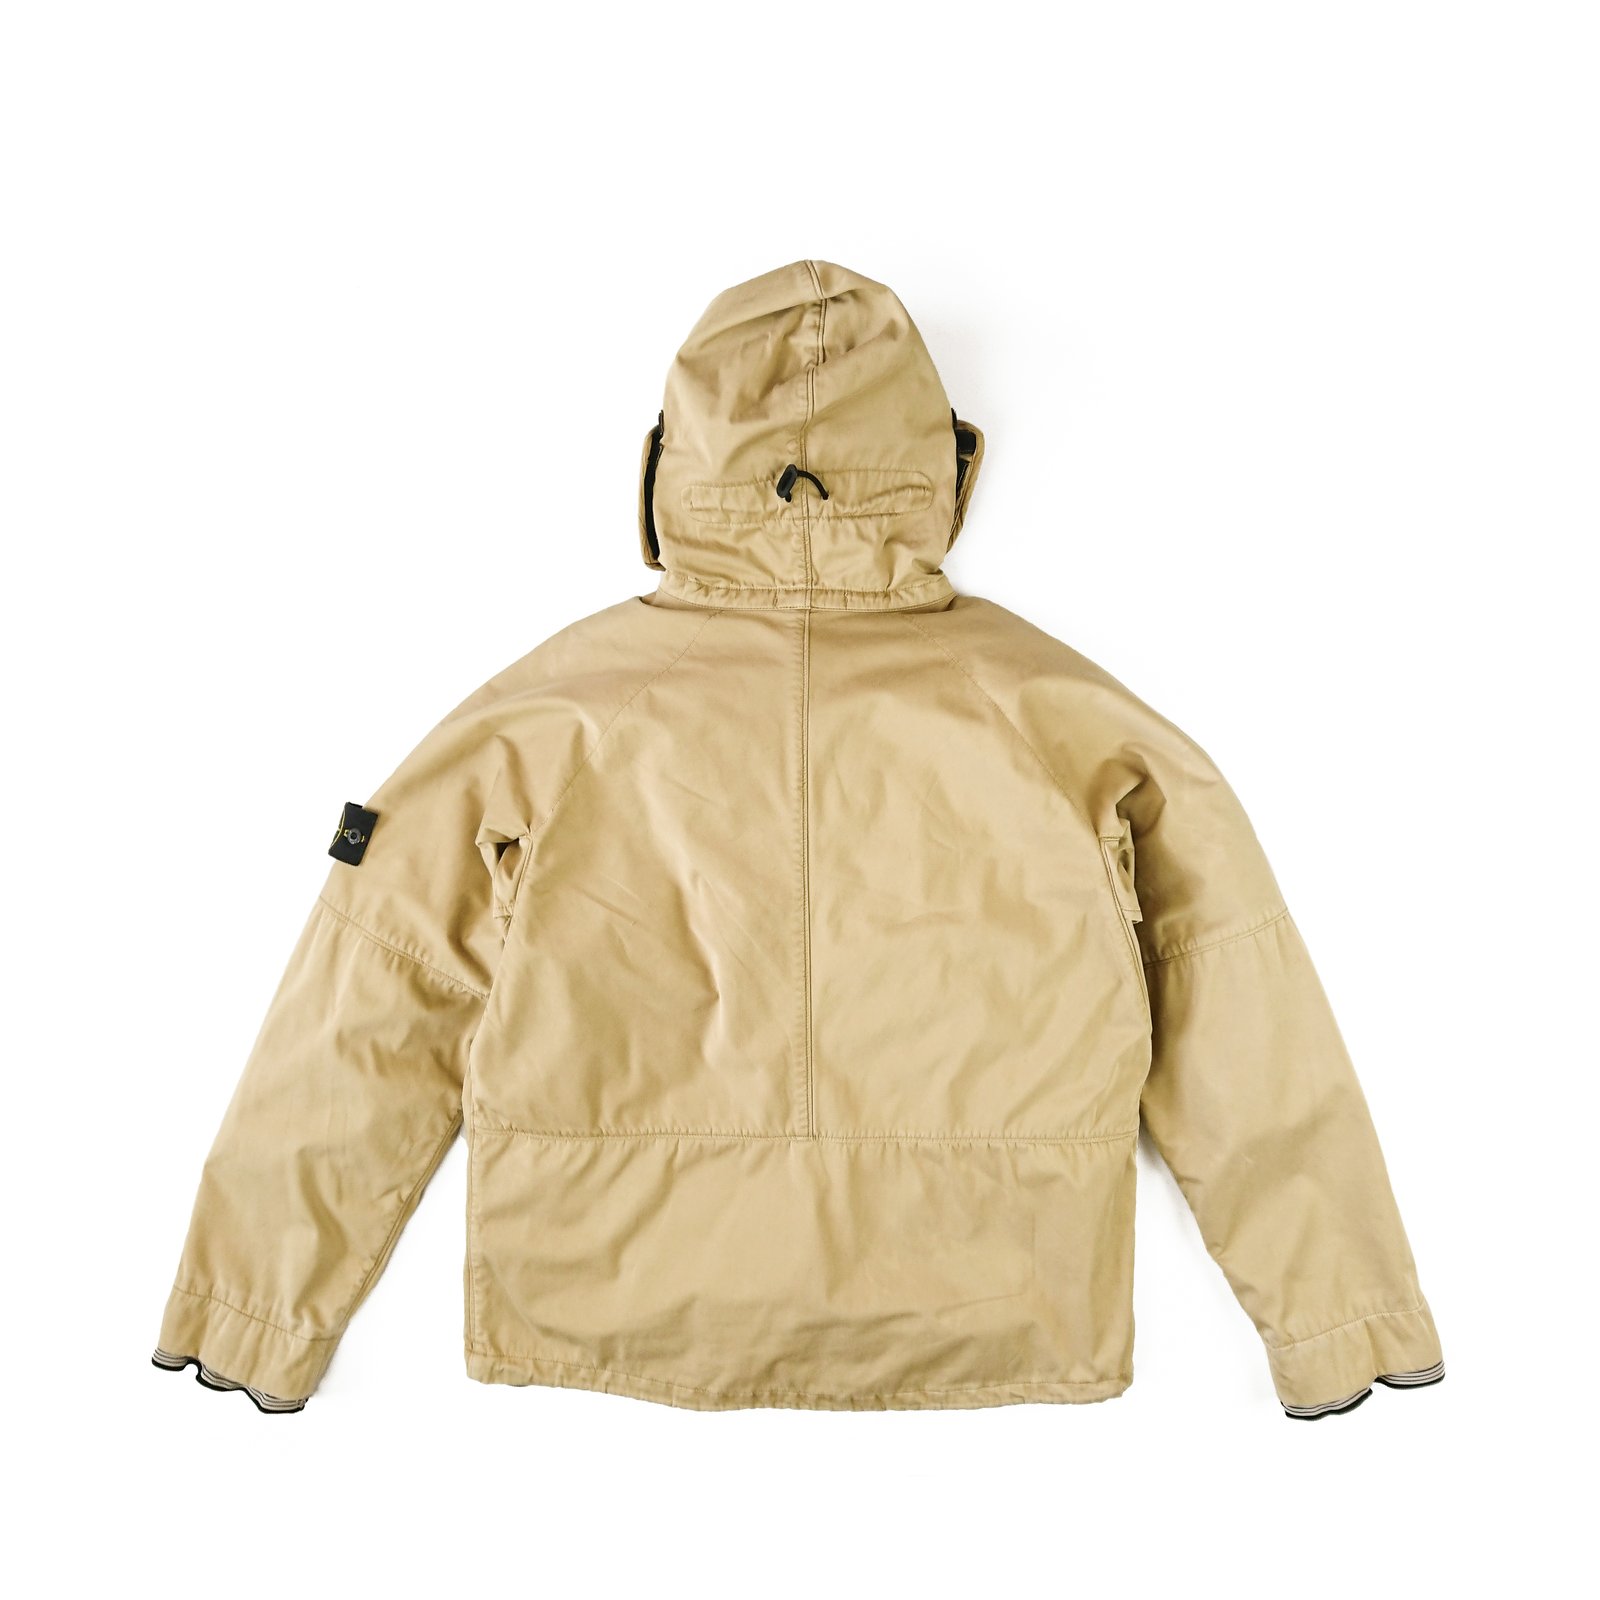 AW 2005 Stone Island 'Riot Mask' Jacket † Ruder Than The Rest